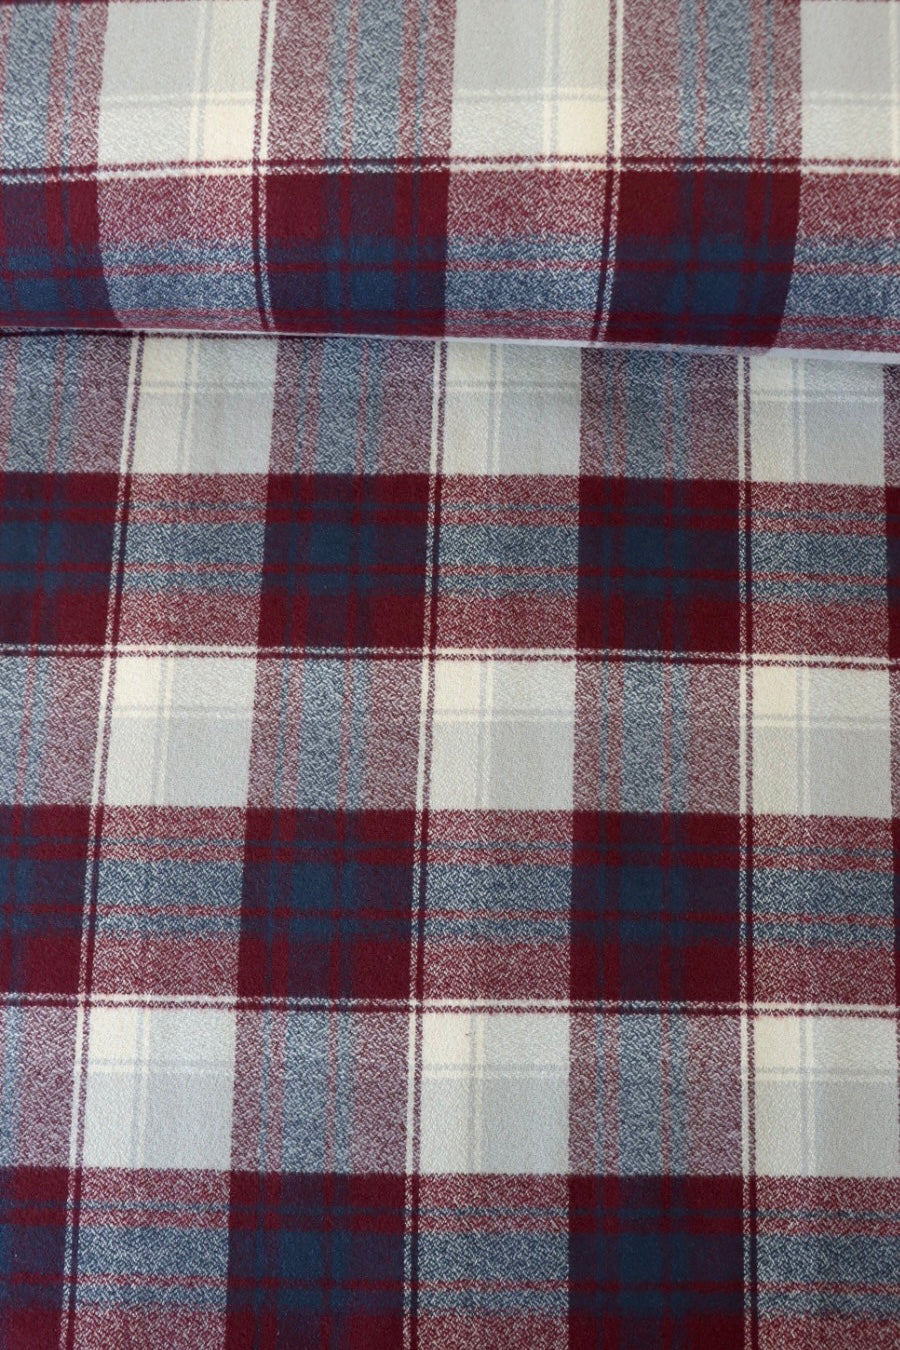 Brown Gingham Fabric by the Half Yard, 1/8 Chocolate Brown and White  Checked Plaid, Robert Kaufman Fabric, 100% Cotton Fabric 